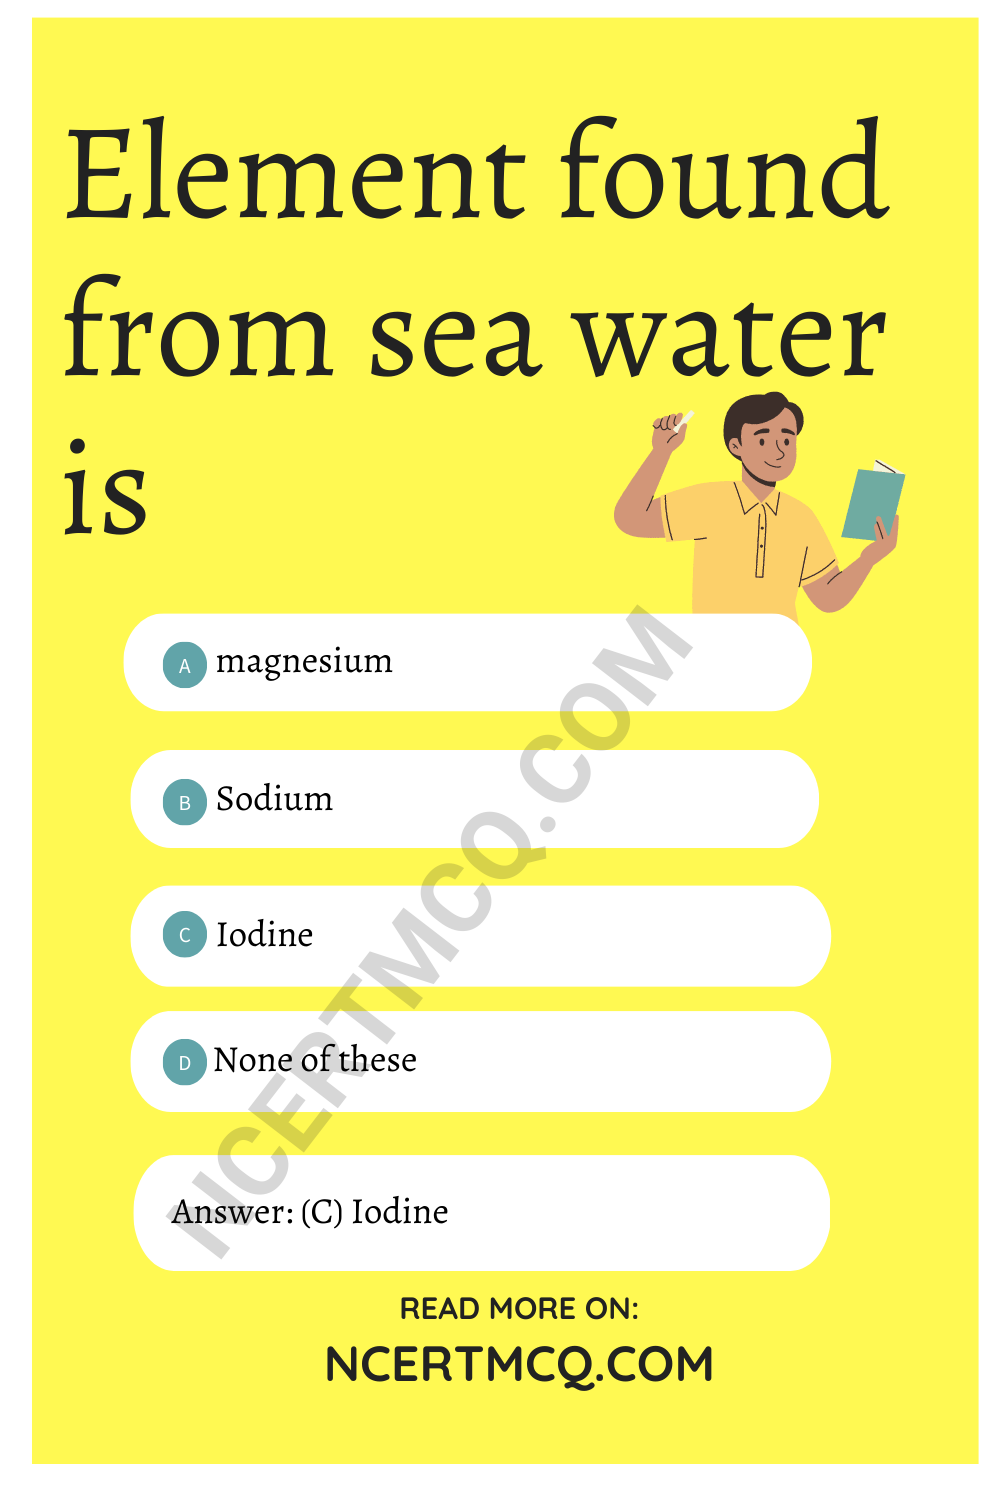 Element found from sea water is